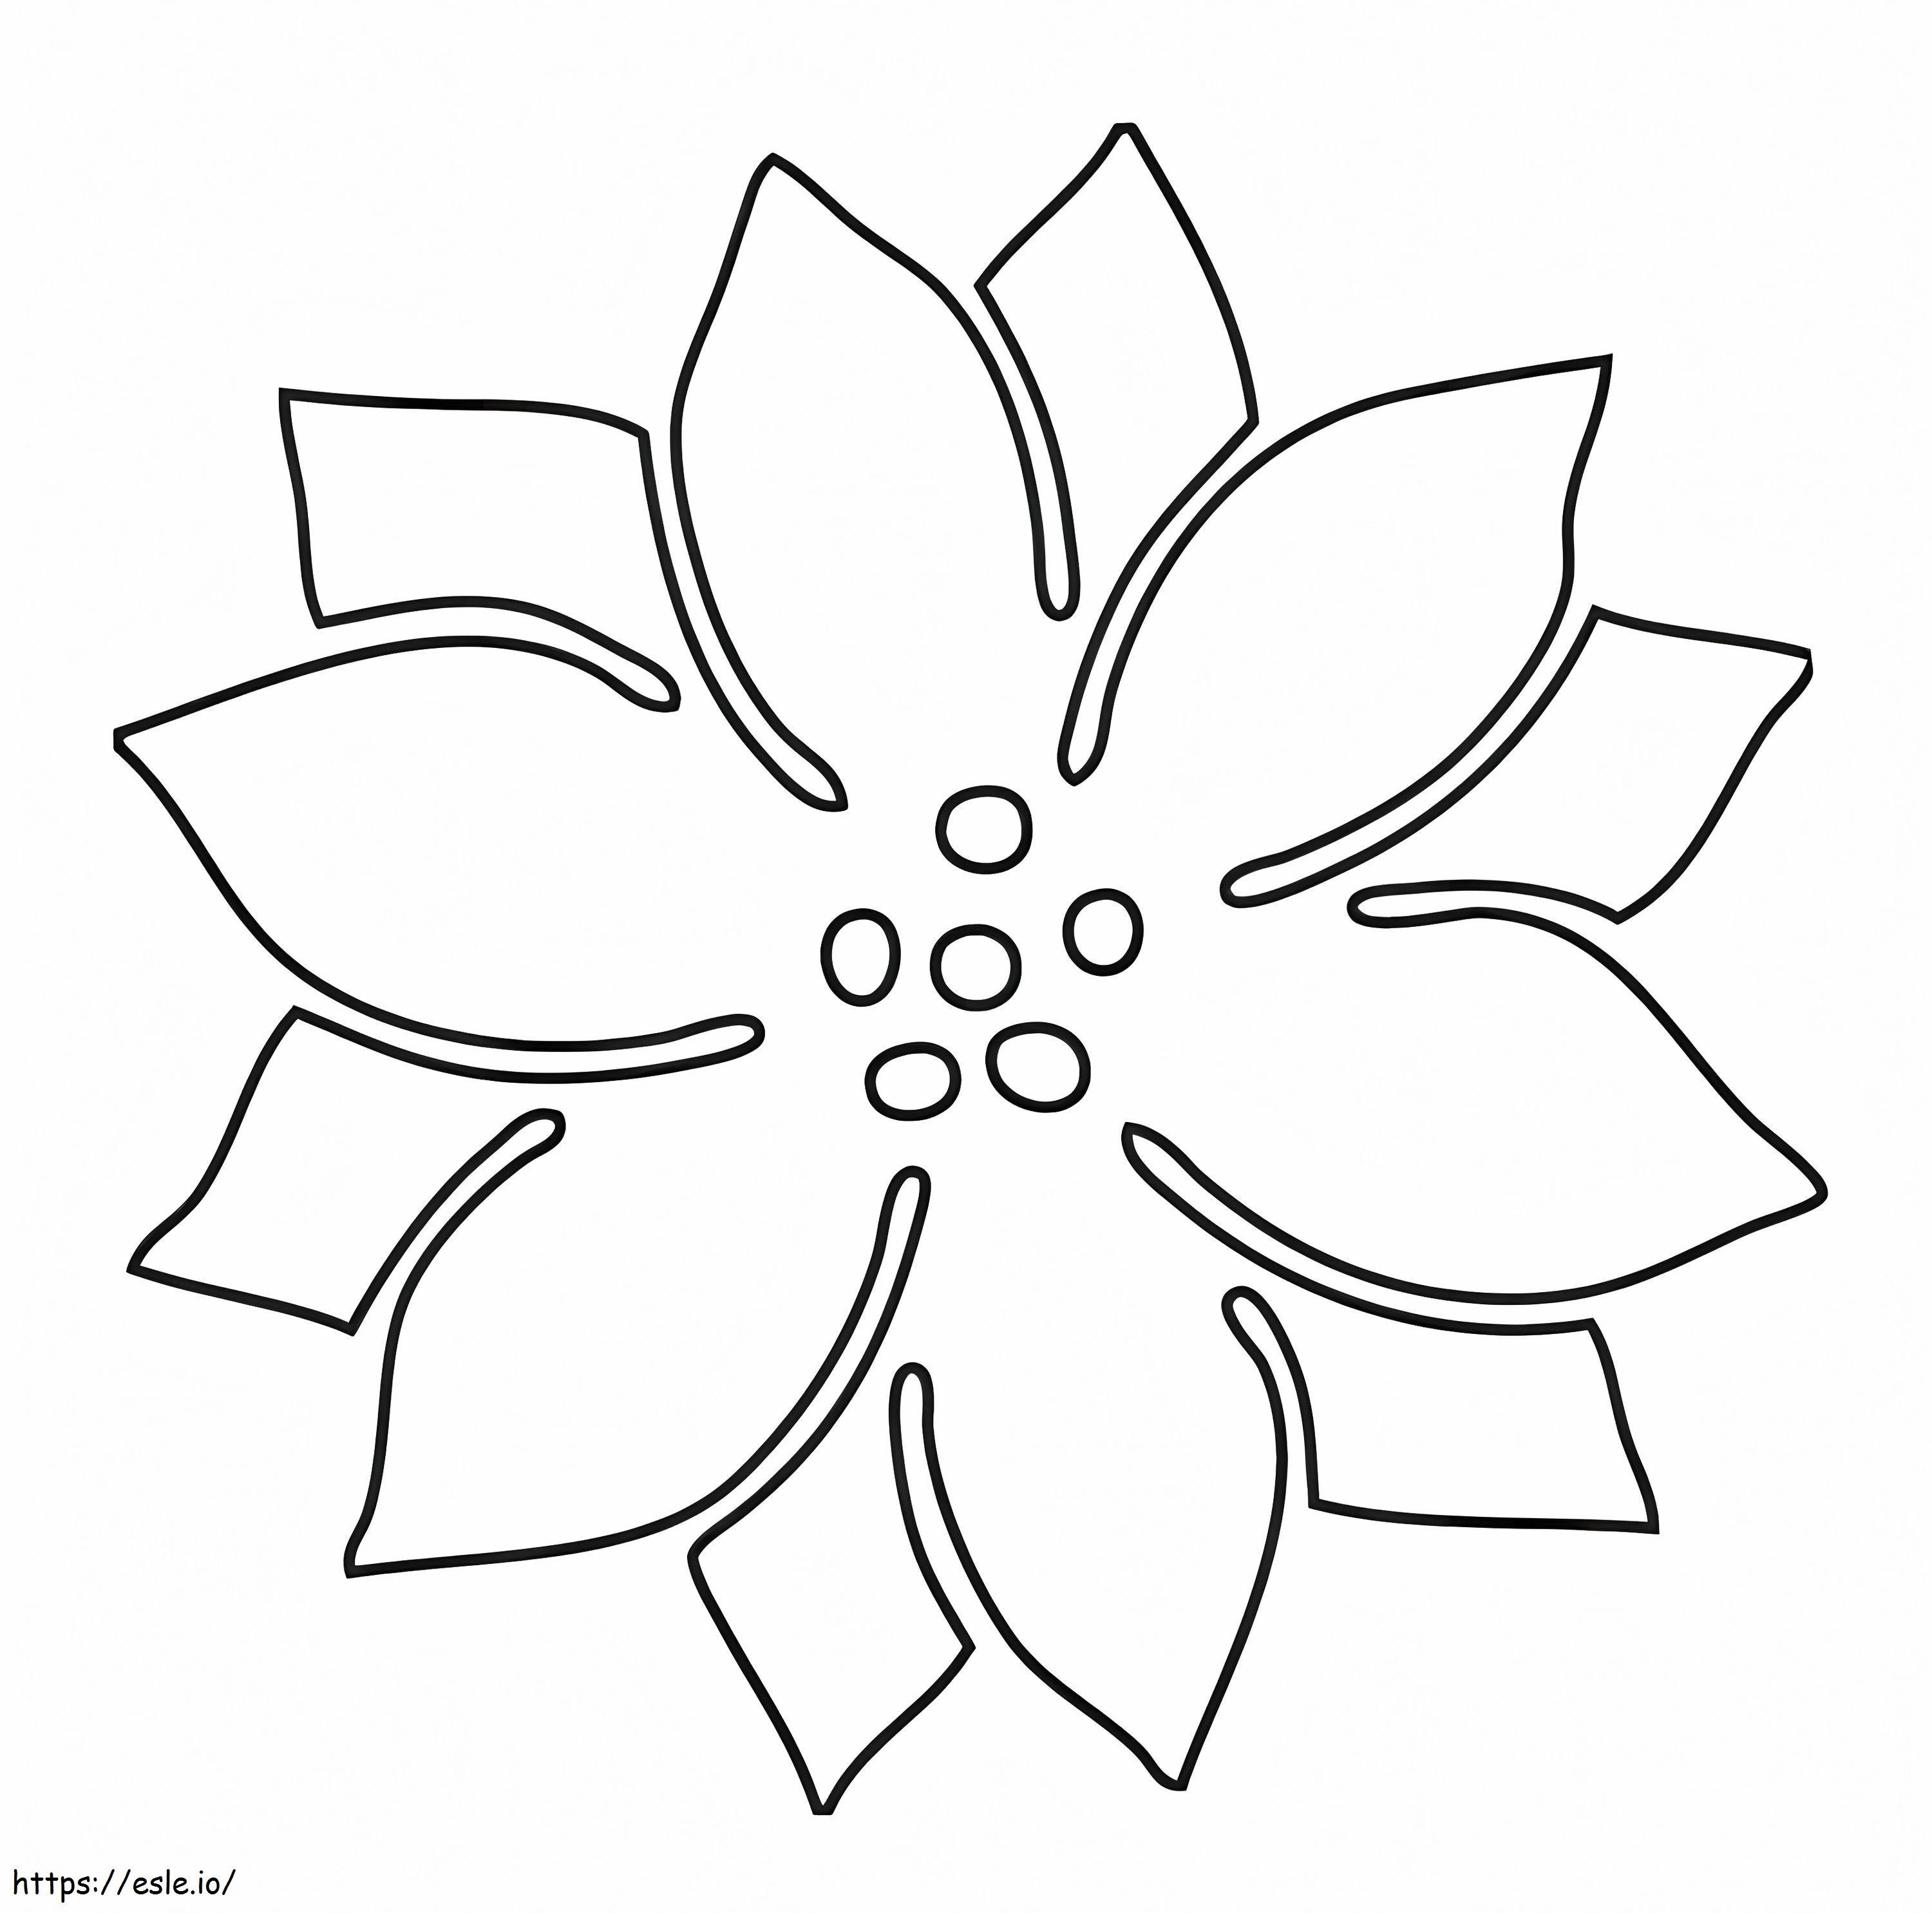 Perfect Poinsettia coloring page